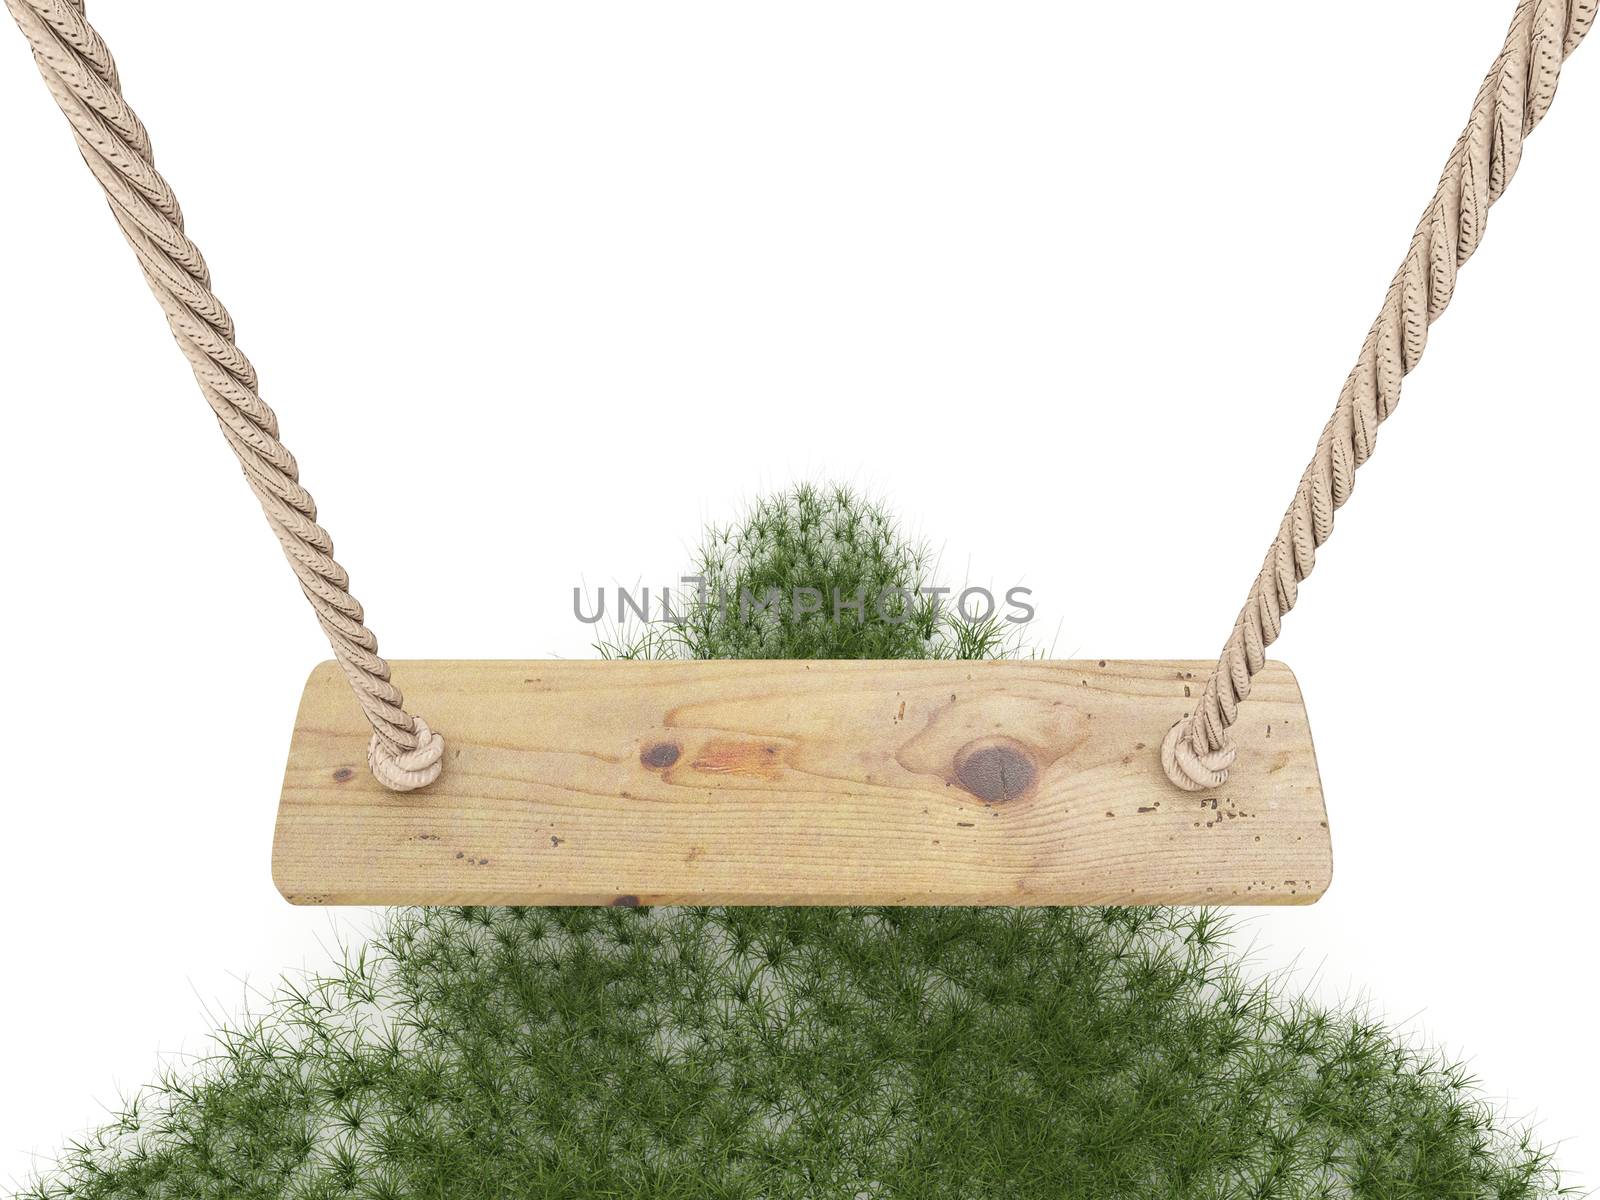 Swing made of rope and a wooden plank over grass 3D render illustration isolated on white background